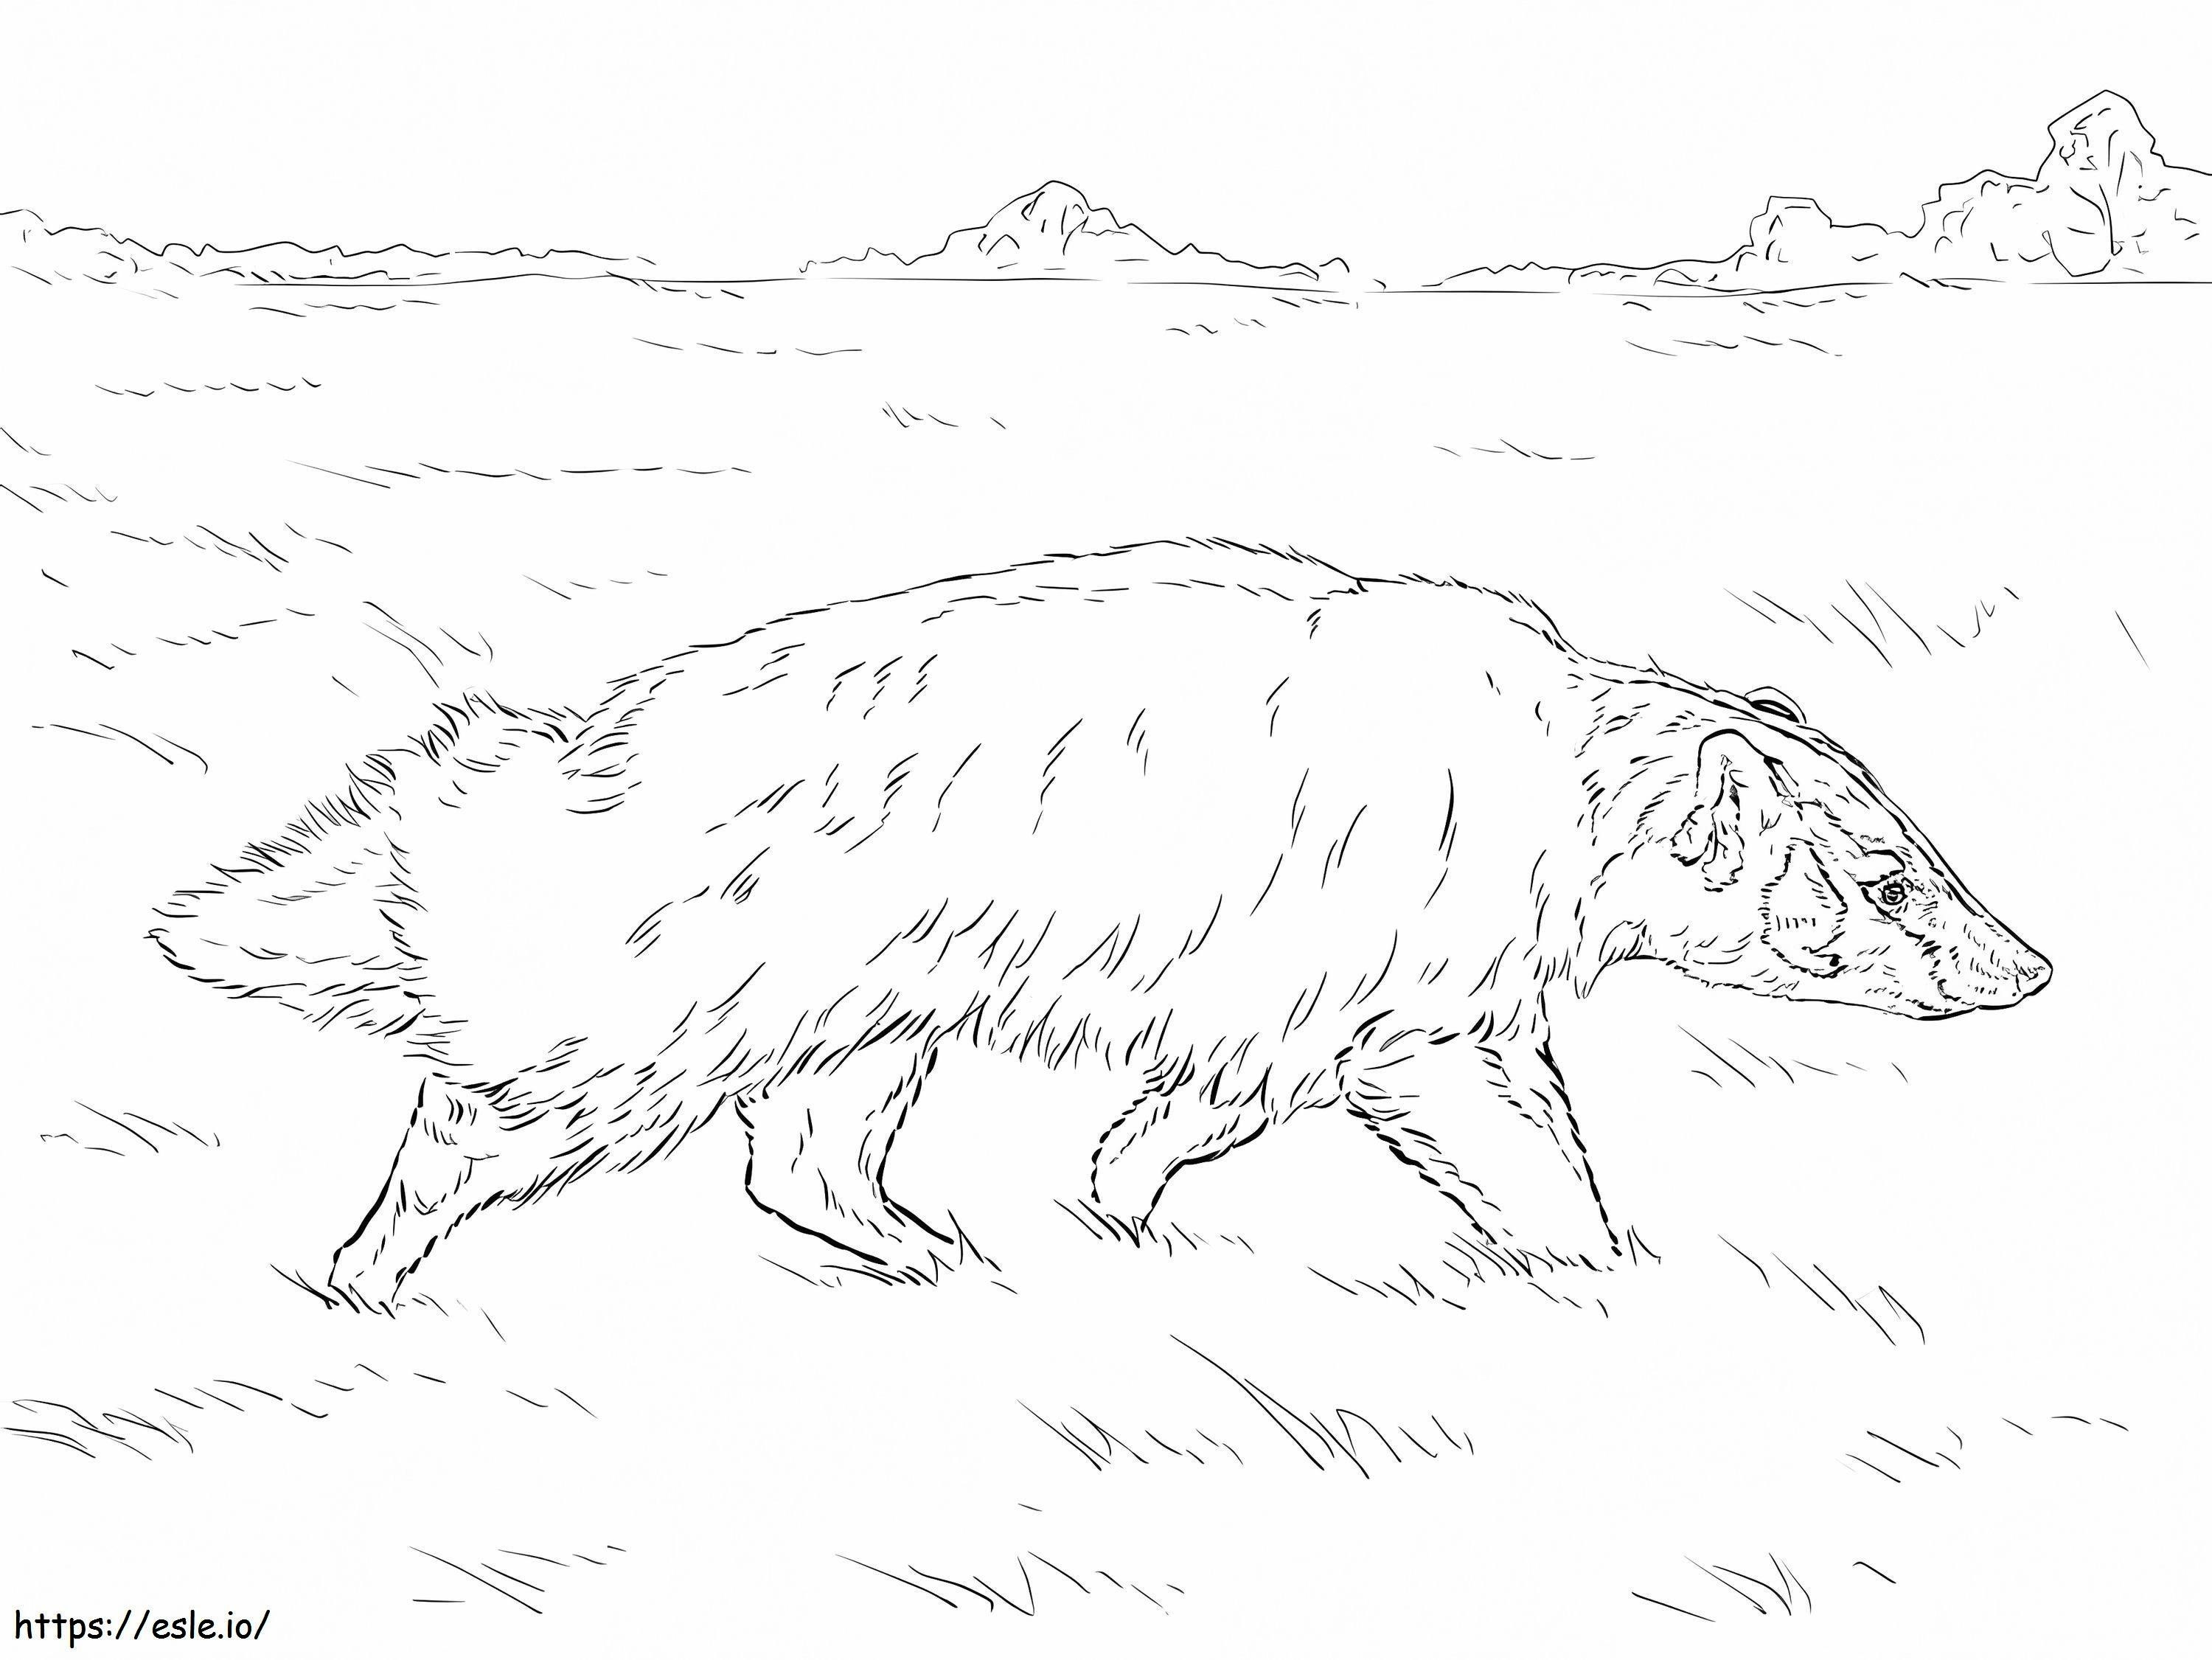 American Badger coloring page